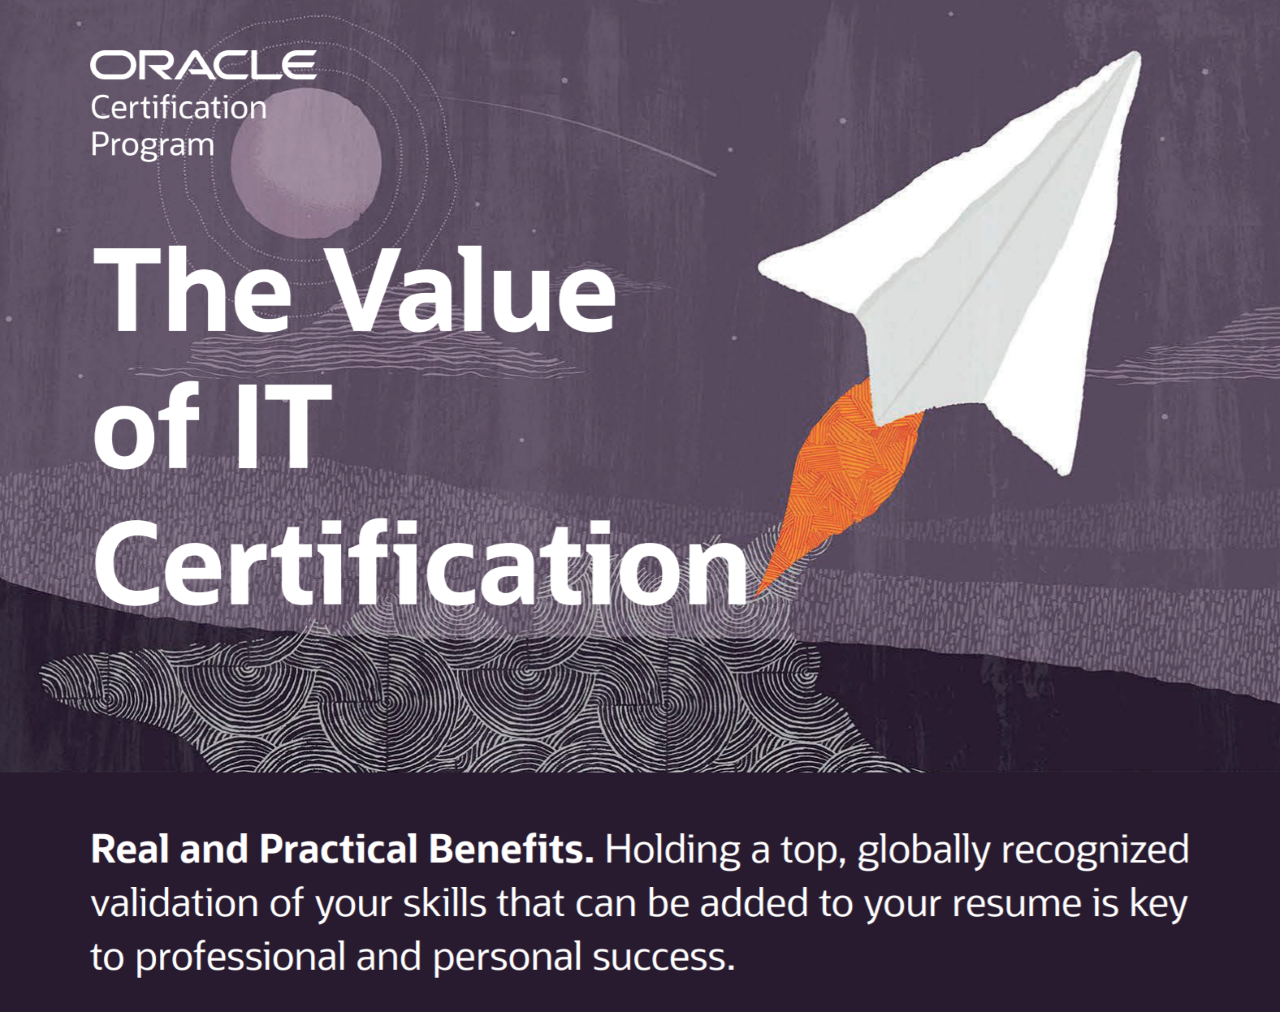 Oracle certification Program, the value of IT Certification, Real and Practical Benefits. Holding a top, globally recognized validation of your skills that can be added to your resume is key to professional and personal success.